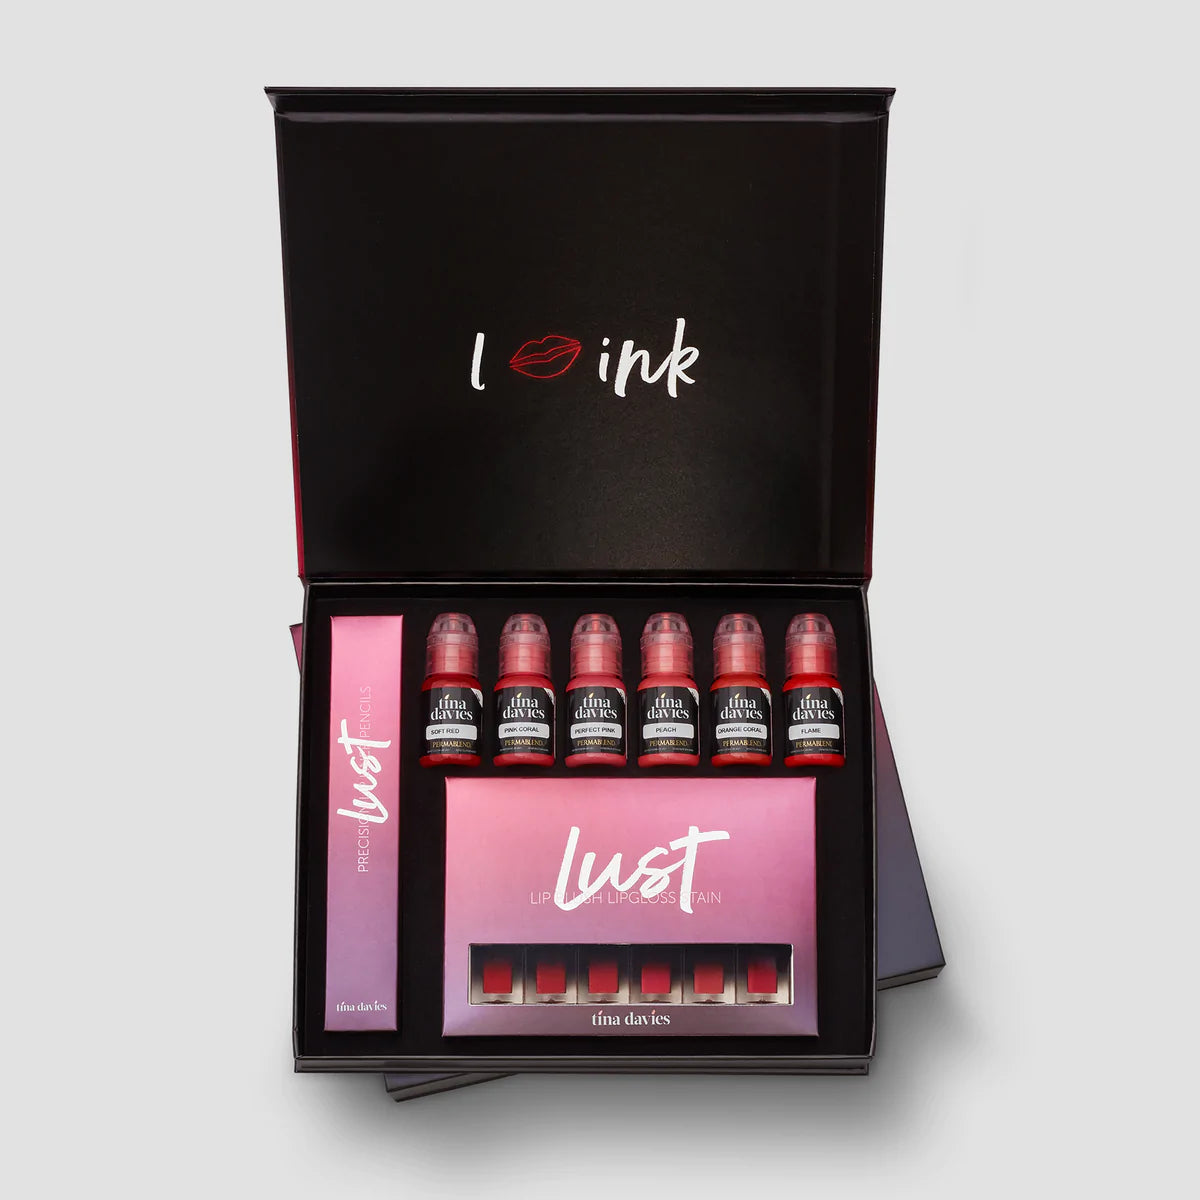 Tina davies lust lip collection in a black box.  consists of 6 pigment bottles along the top row of the box, a long narrow box to the left and a rectangular box at the bottom with 6 matching lip gloss colors in them